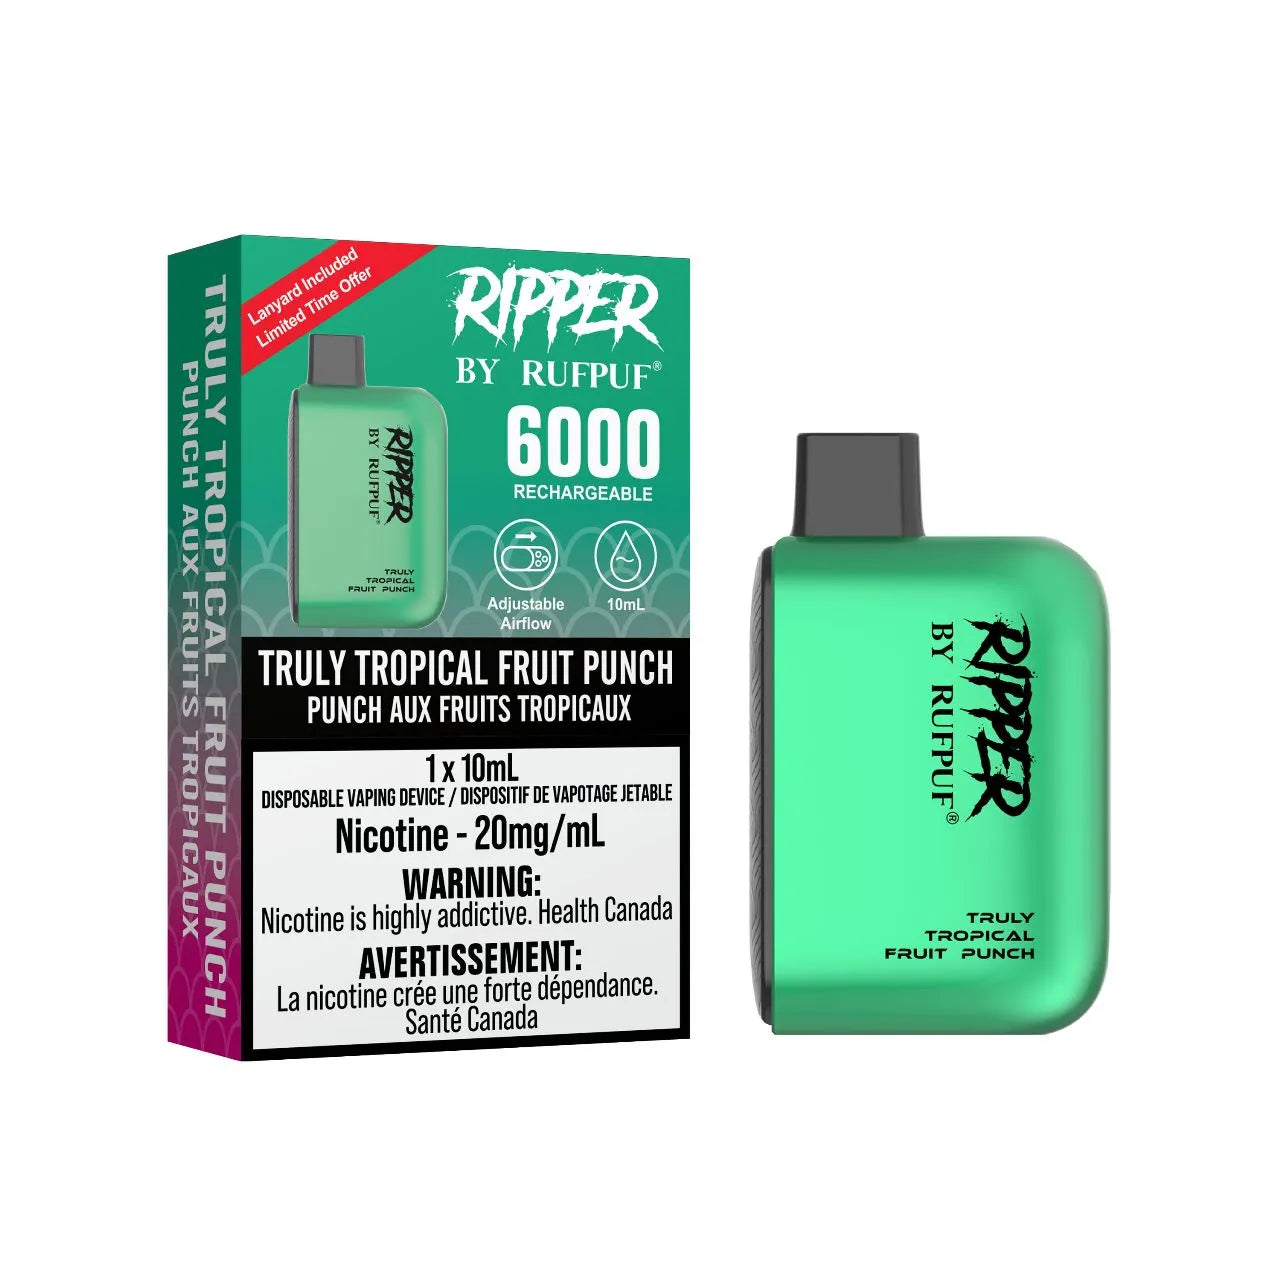 Rufpuf Ripper Truly Tropical Fruit Punch Disposable Vape - Online Vape Shop Canada - Quebec and BC Shipping Available